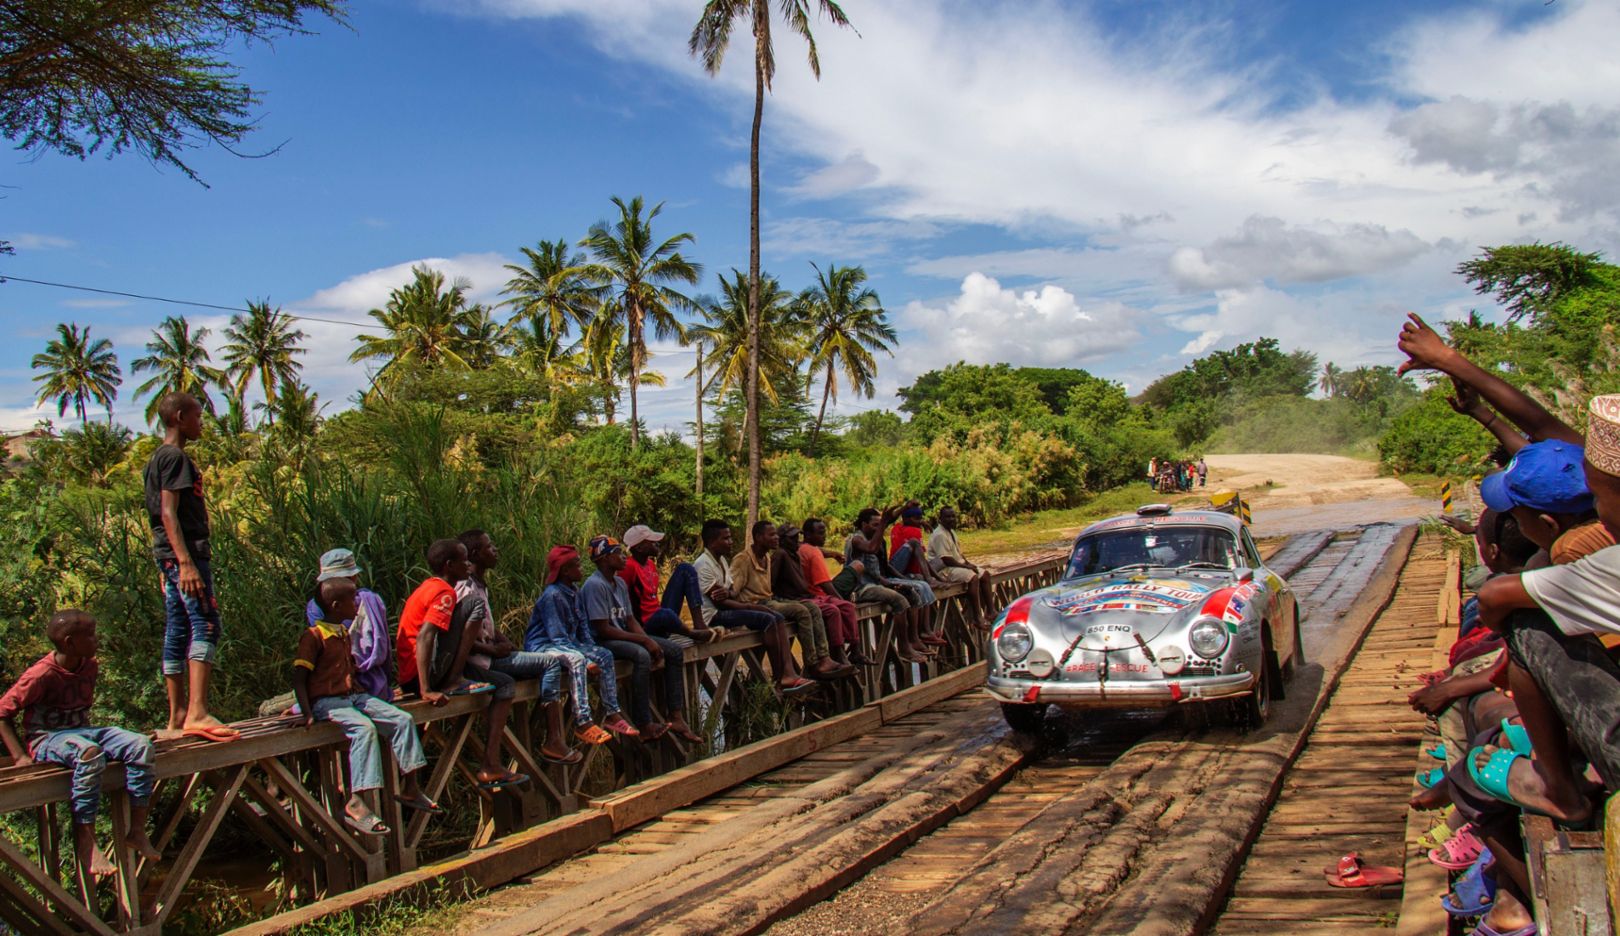 The East African Safari Classic Rally is another important classic. It stretches across broad swathes of East Africa. Its origins can be traced back to the 1950s. The Valkyrie Racing team was confronted with difficult conditions here in 2019. 